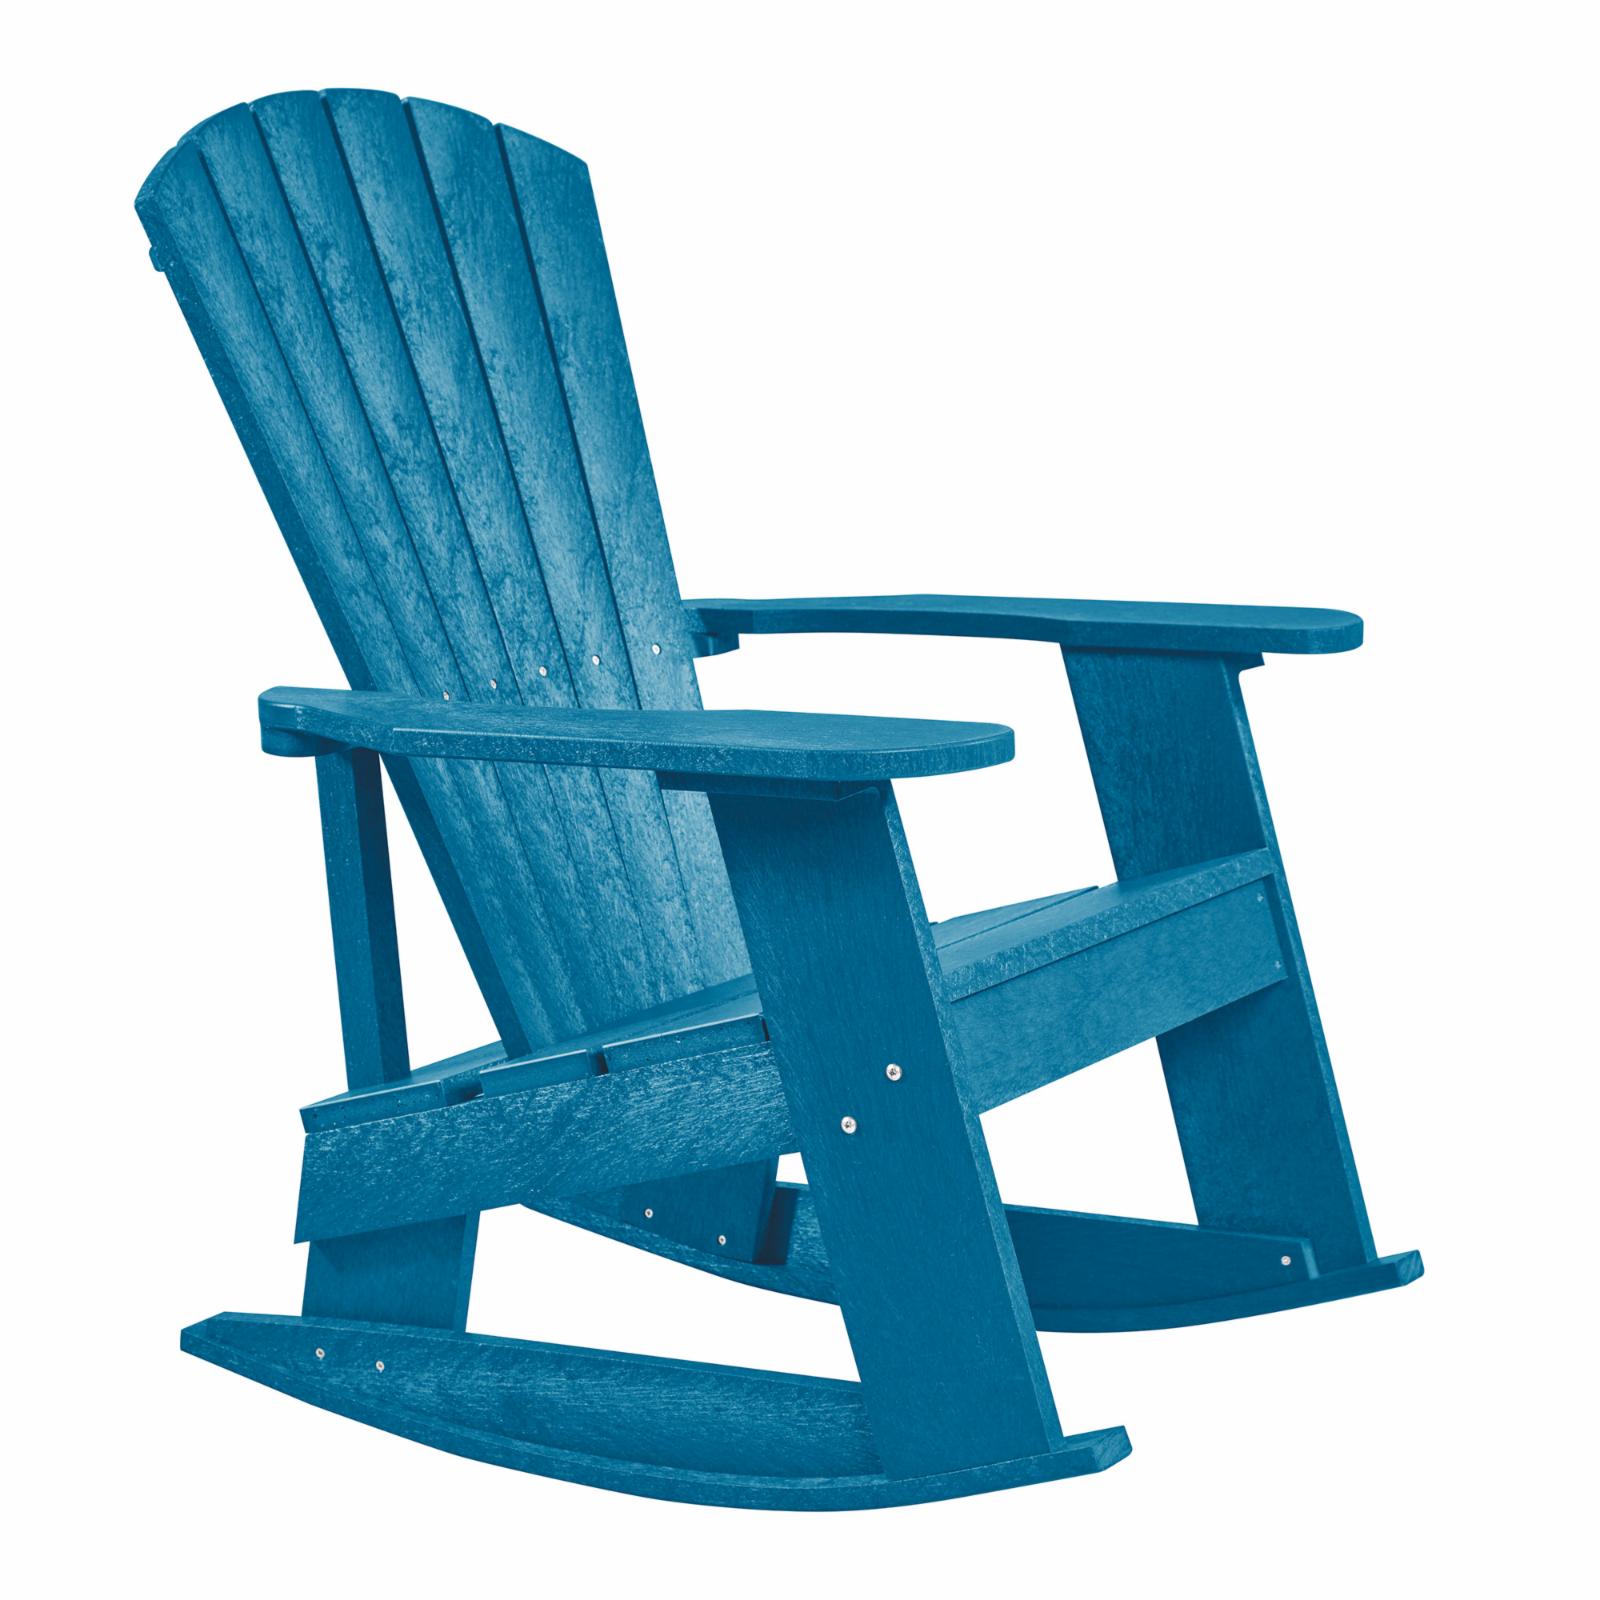 HN Outdoor Logan Recycled Plastic Adirondack Rocking Chair - image 1 of 10